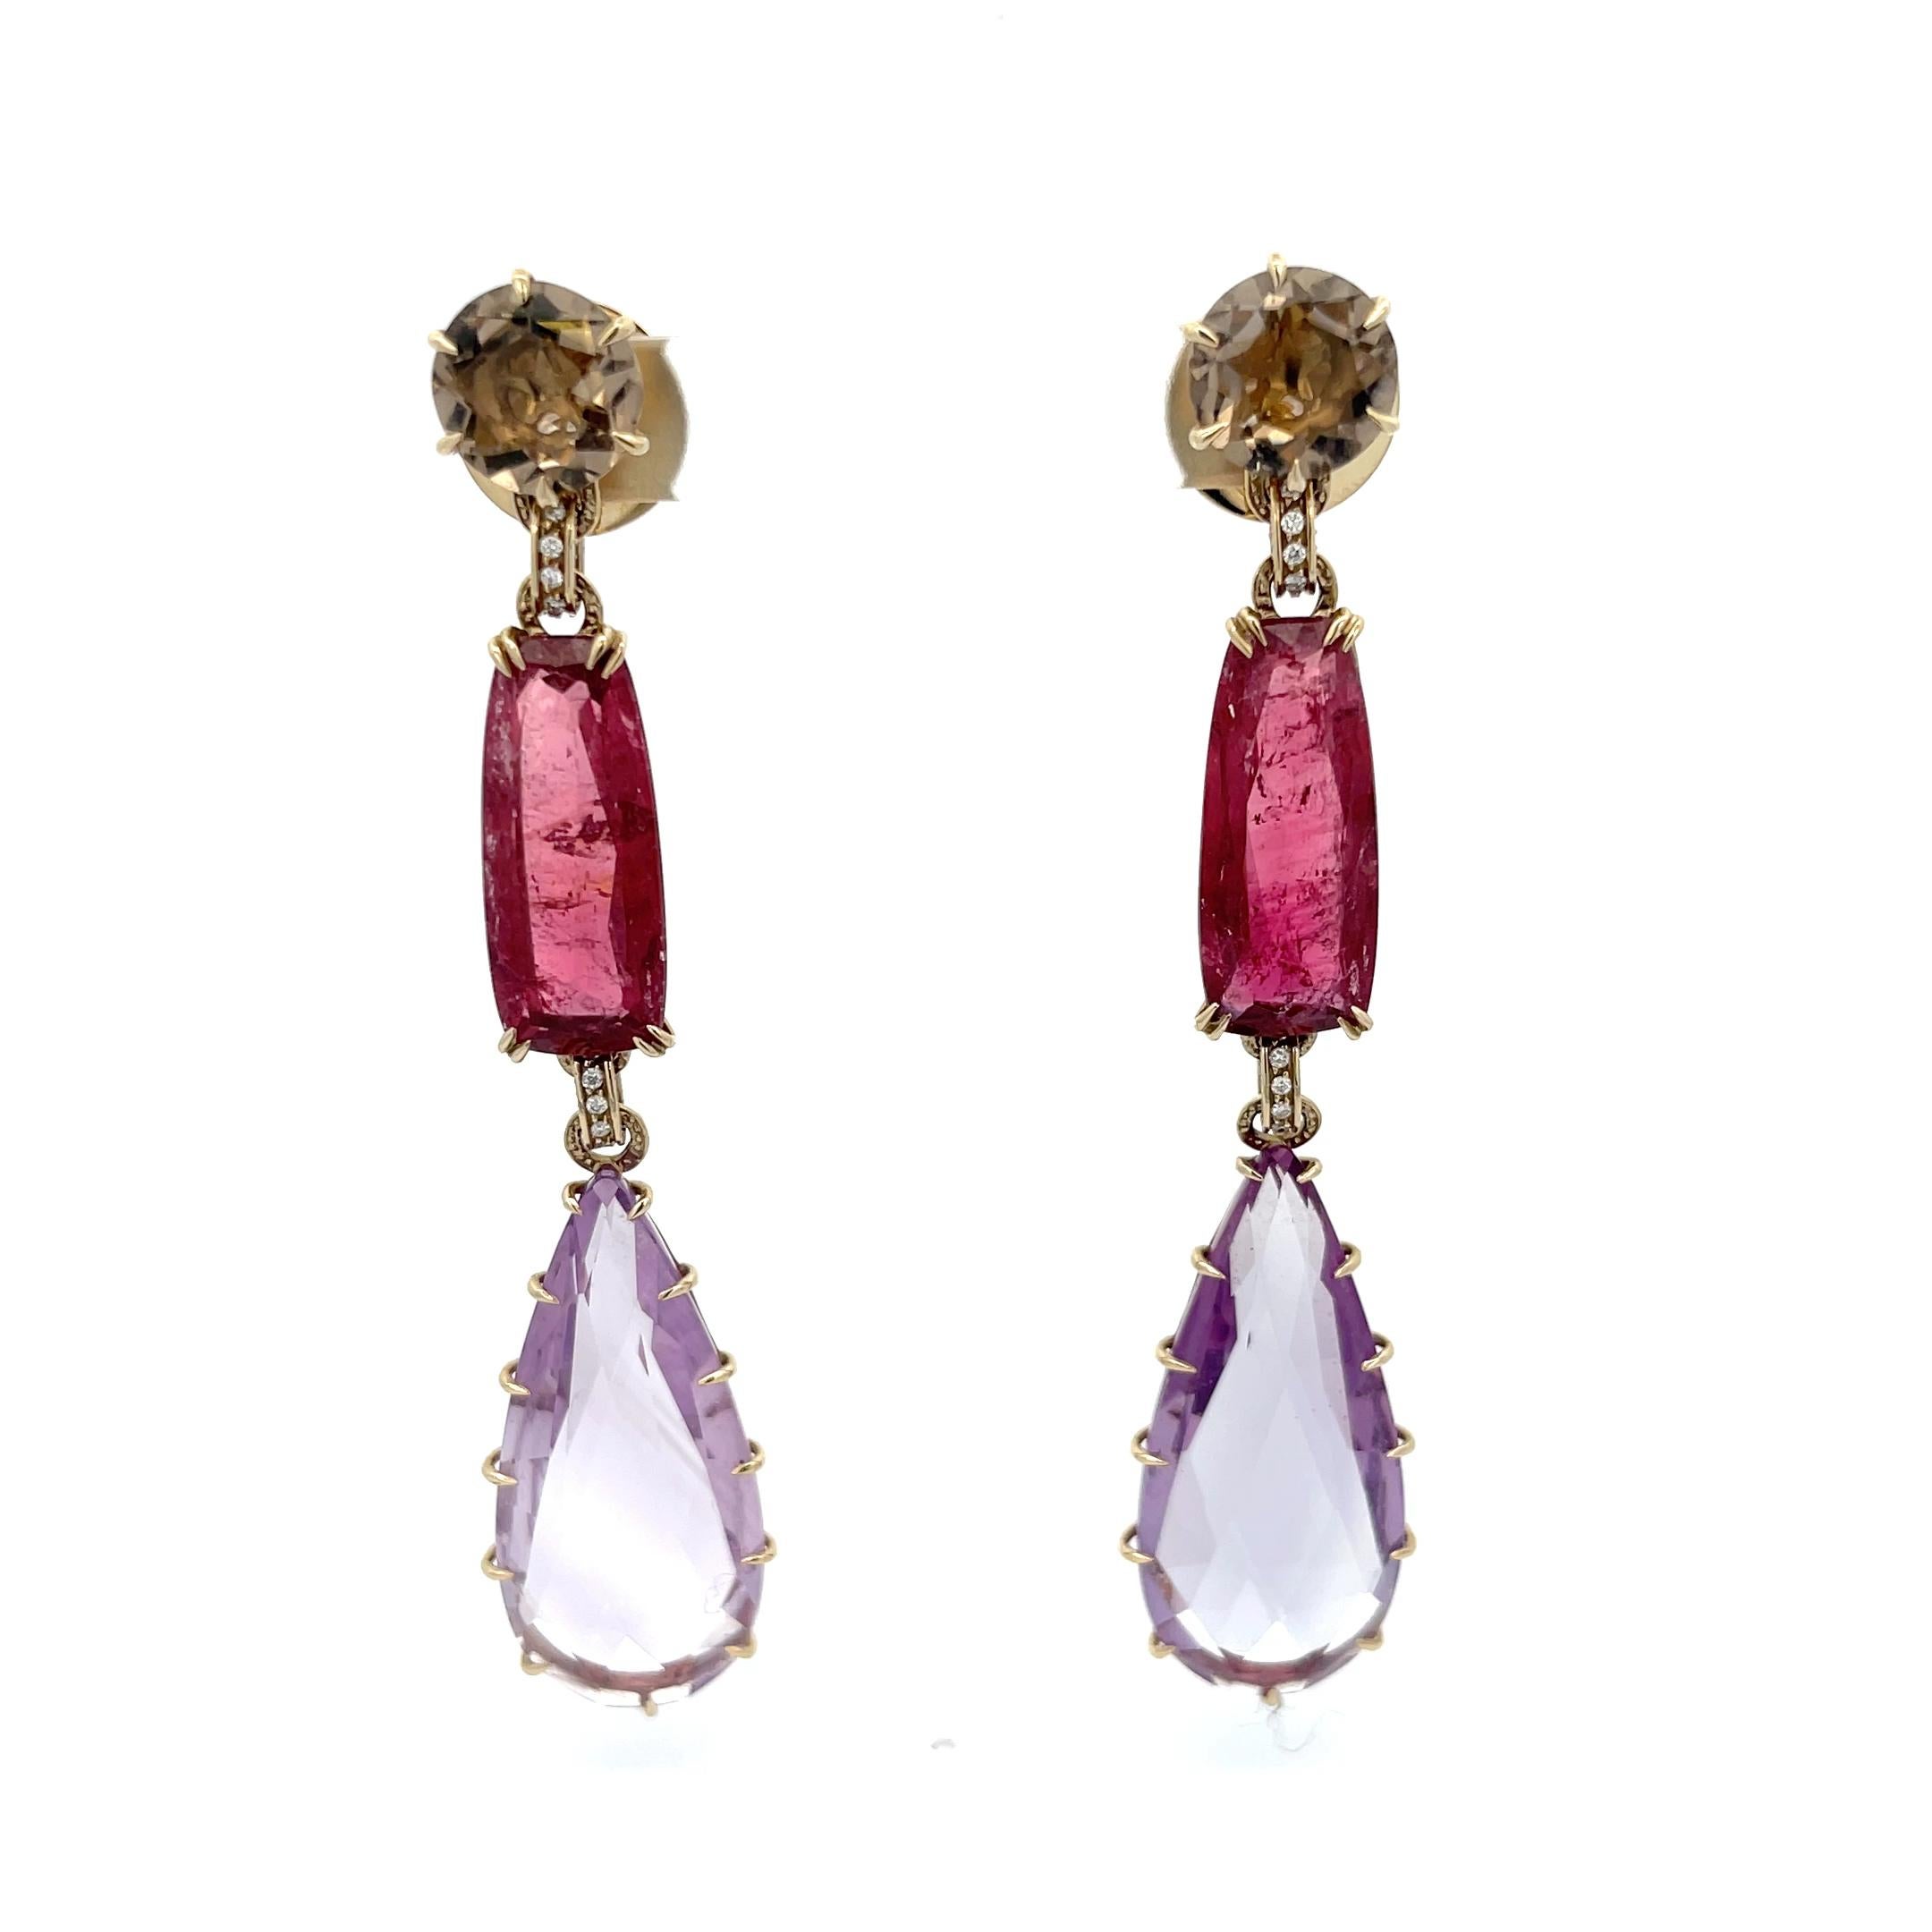 H Stern Pink Tourmaline and Amethyst Dangle Earrings in 18K Yellow Gold.
3.25